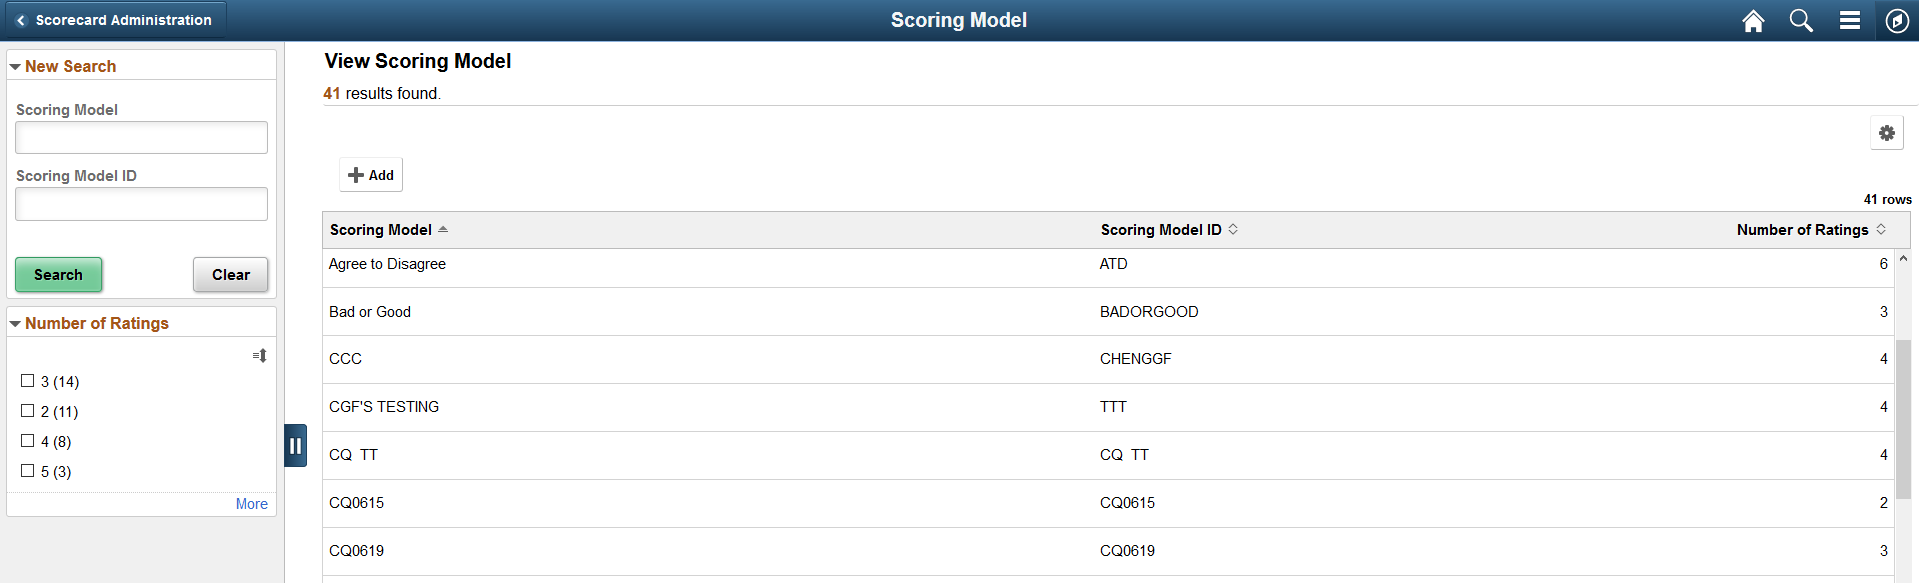 Scoring Models Search Page